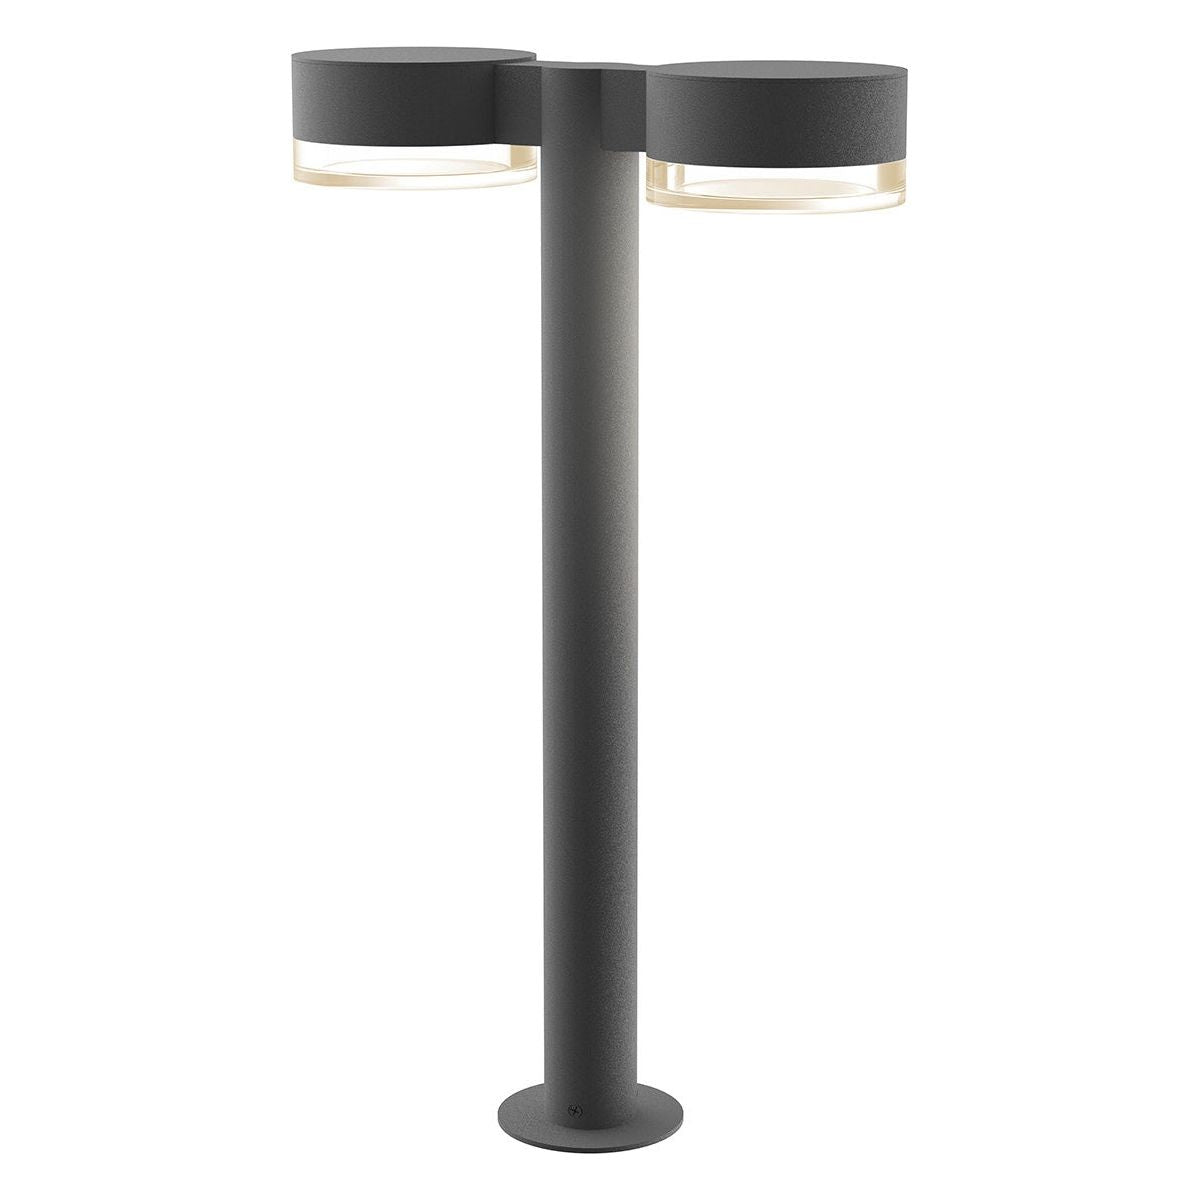 REALS 22" LED Double Bollard with Plate Cap and Cylinder Lens